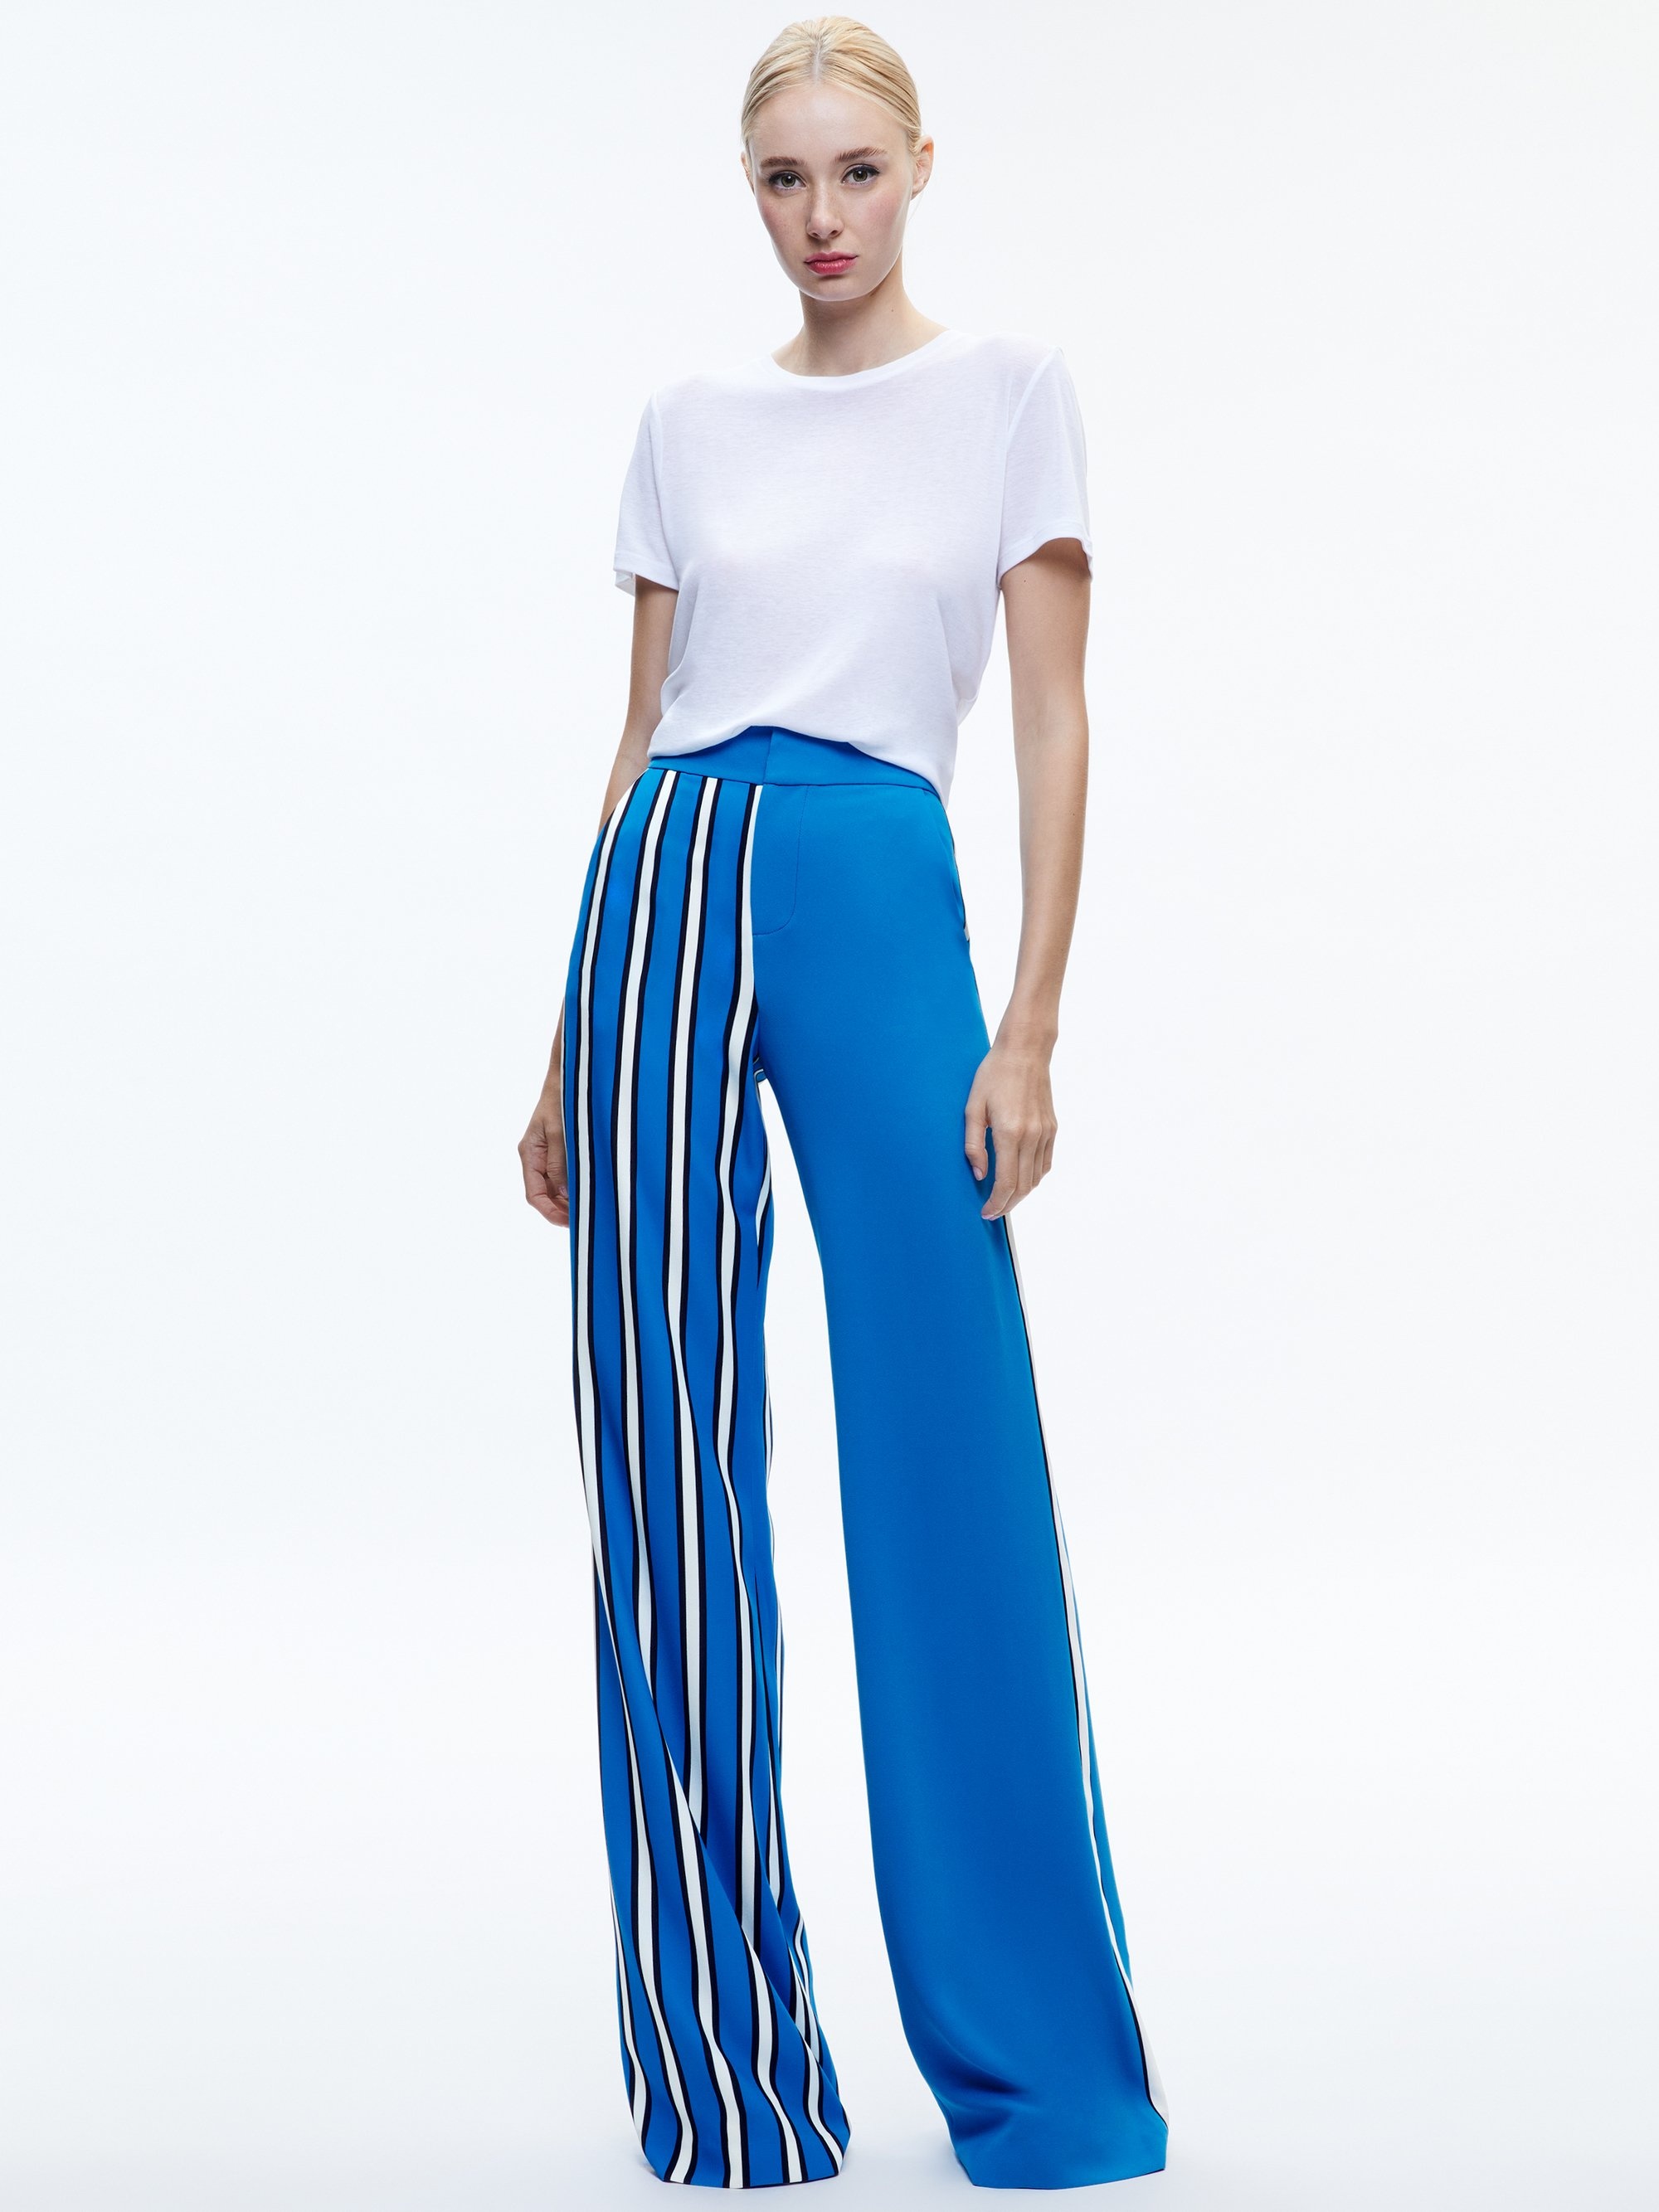 DYLAN HIGH RISE COLORBLOCK PANT - 3